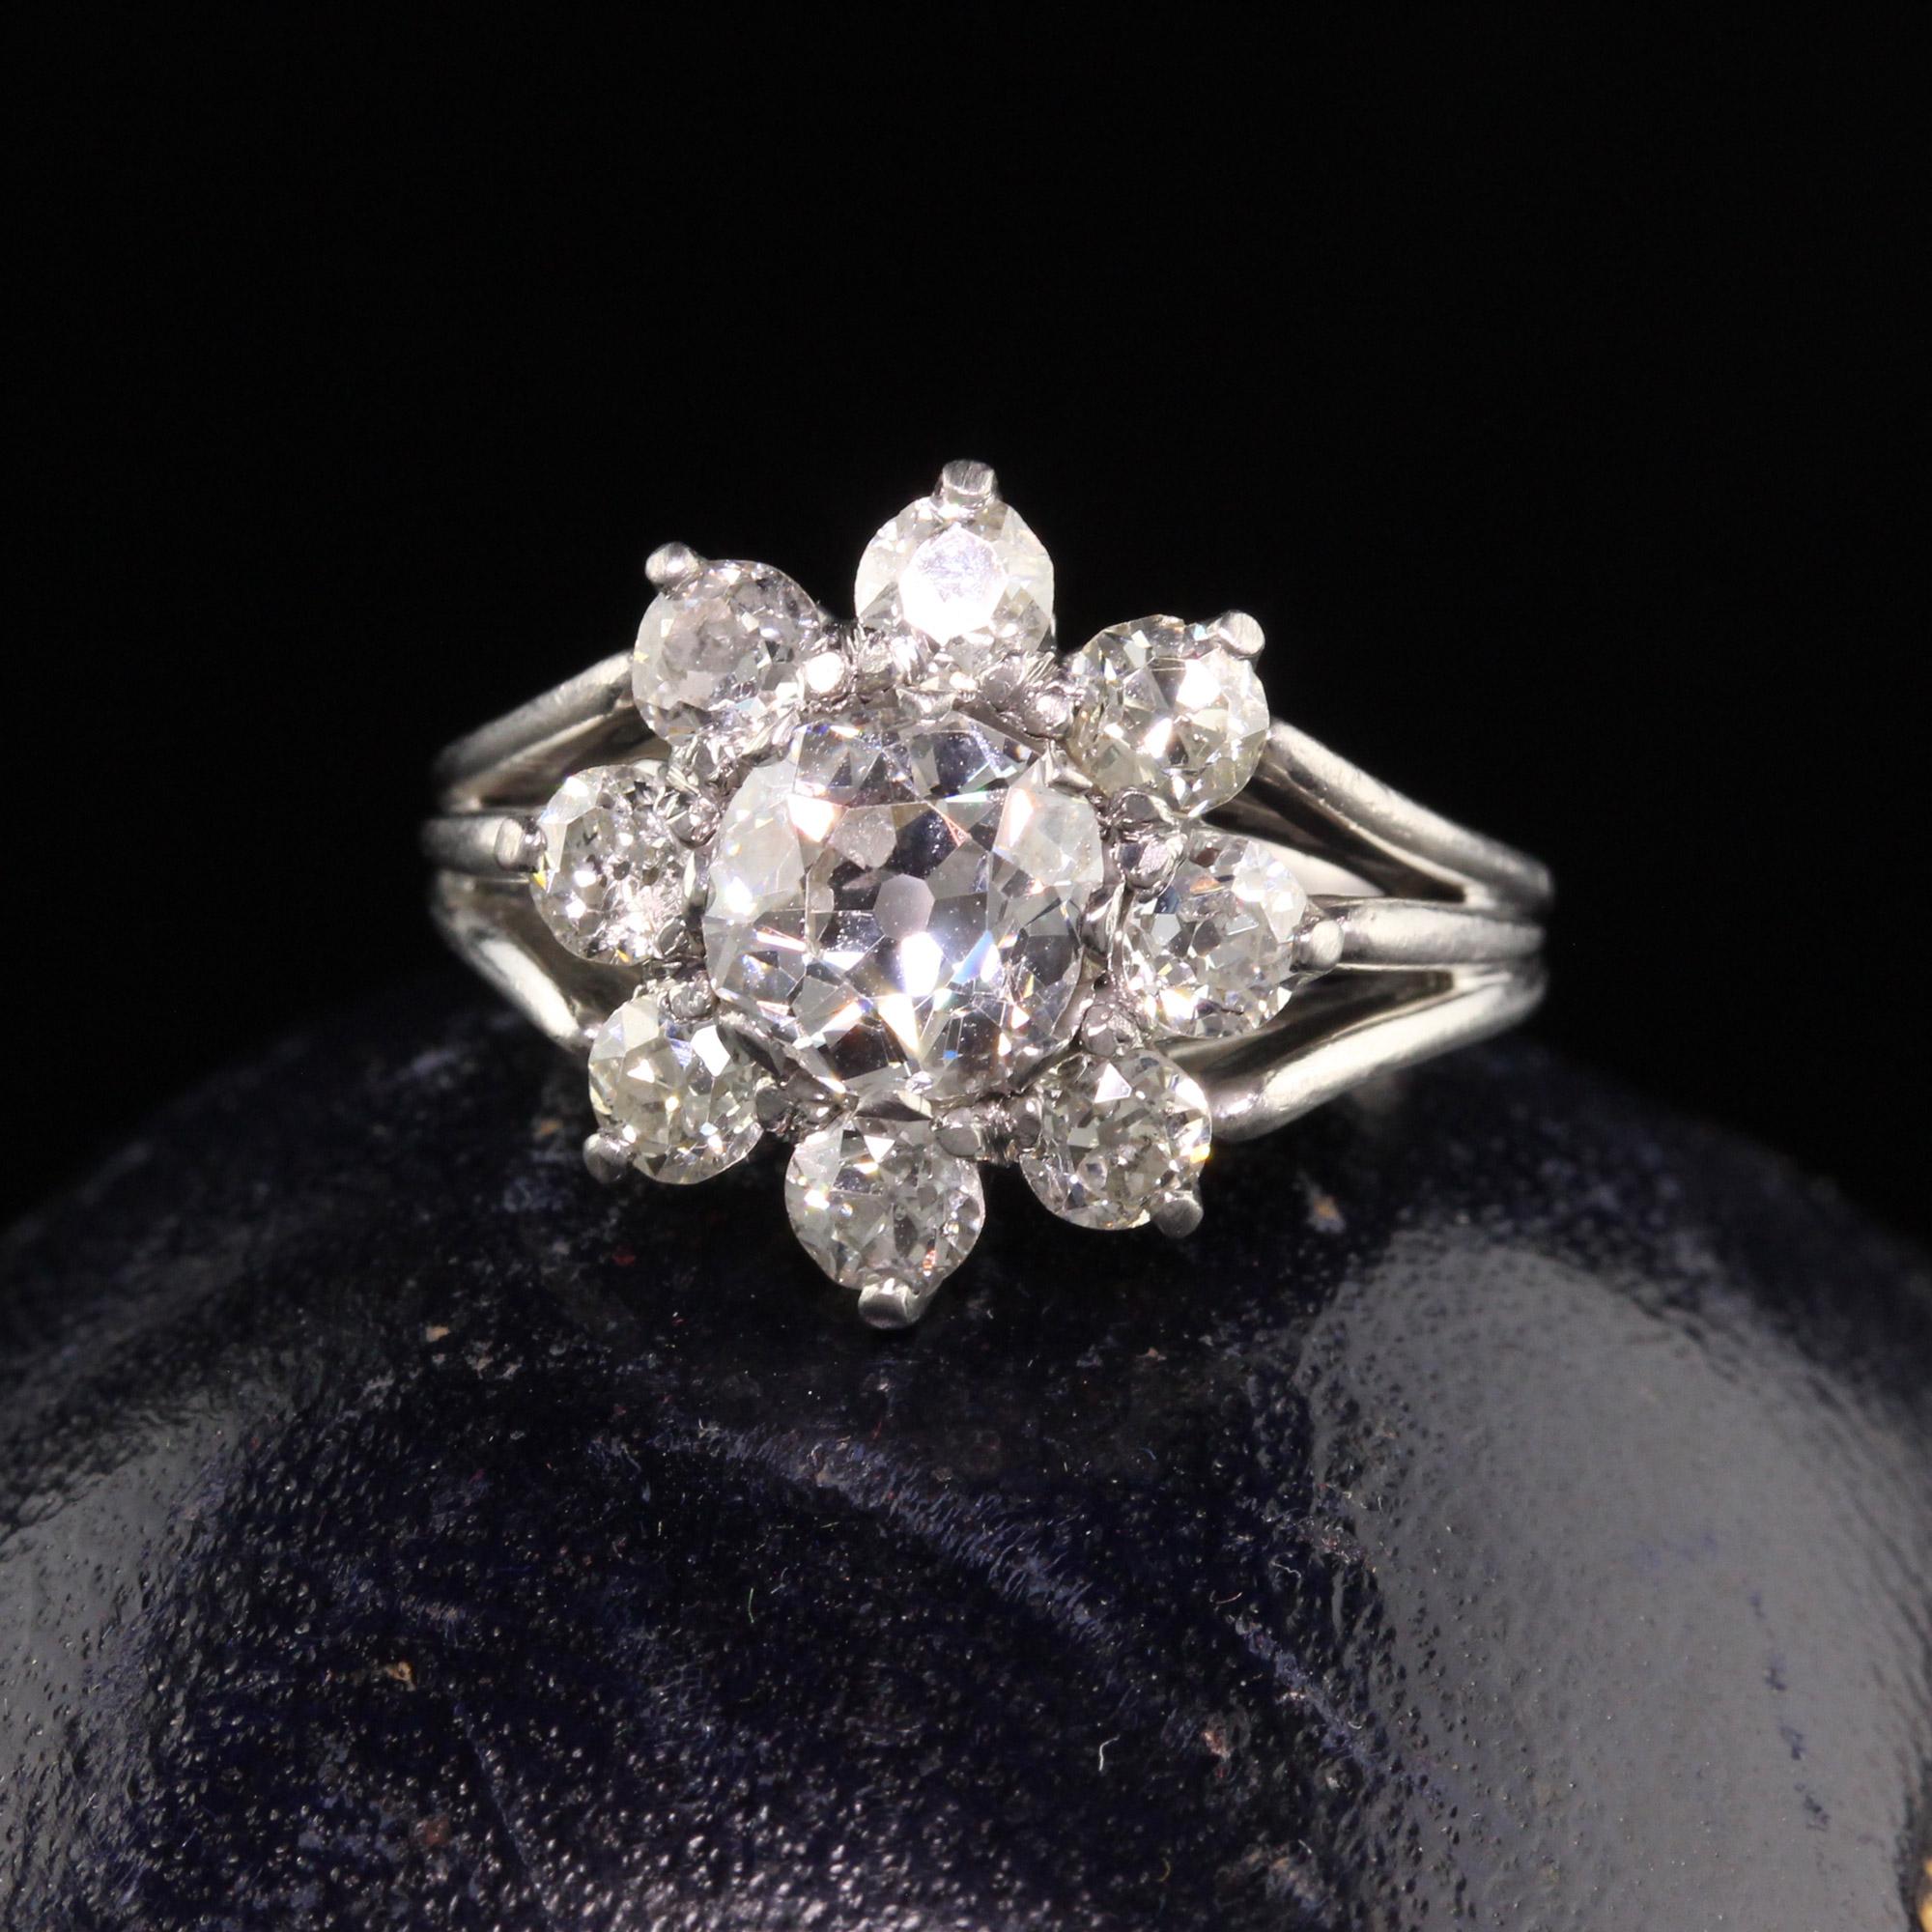 Beautiful Antique HW Beattie and Sons Art Deco Platinum Old Mine Diamond Engagement Ring. This gorgeous engagement ring features an old mine diamond in the center of a low profile mounting surrounded by old european cut diamonds.

Item